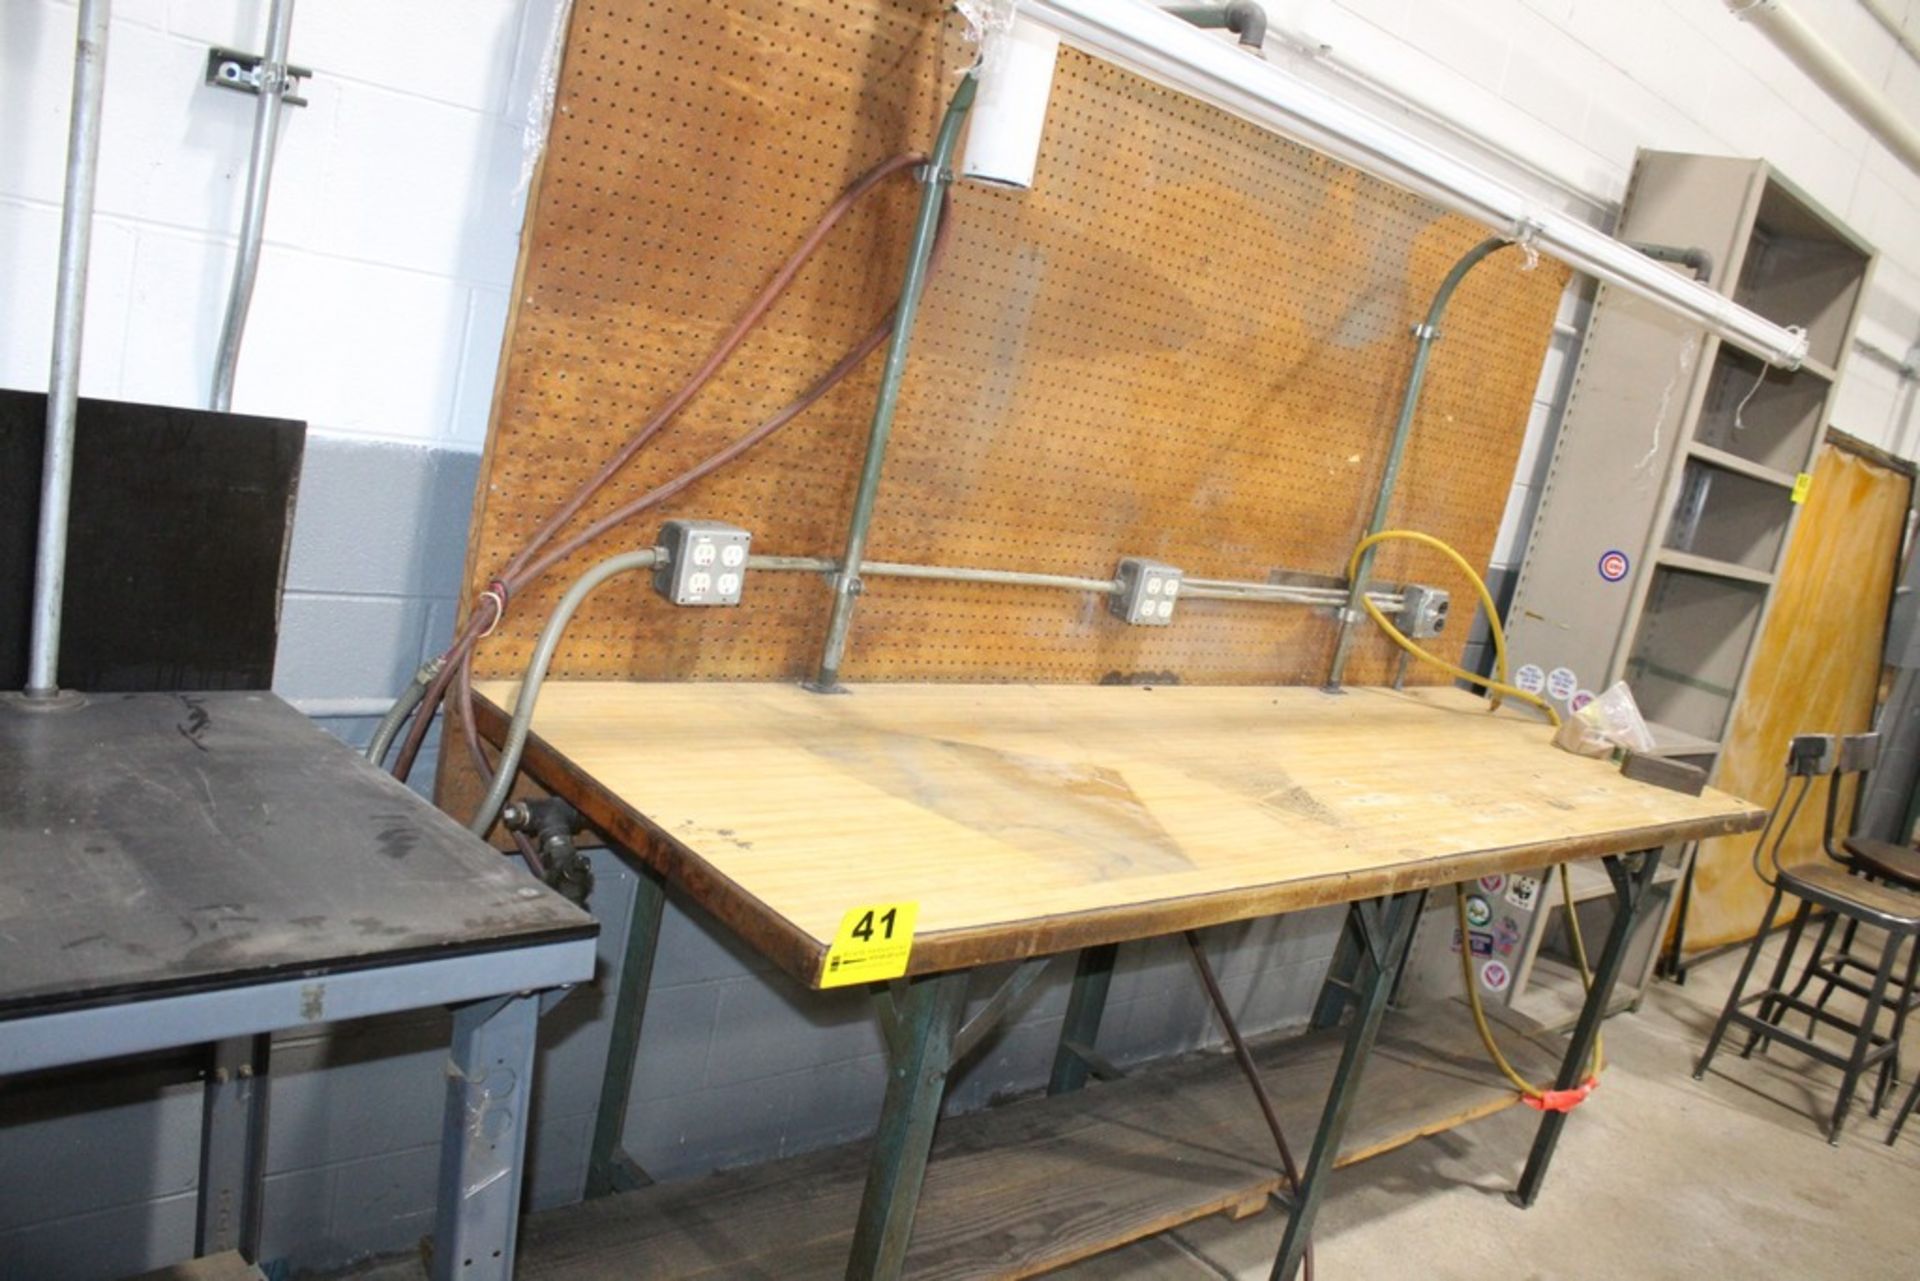 96" X 30" X 36" WOOD TOP, STEEL FRAME WORKBENCH WITH 110V OUTLETS AND OVERHEAD LIGHT LOADING FEE: $